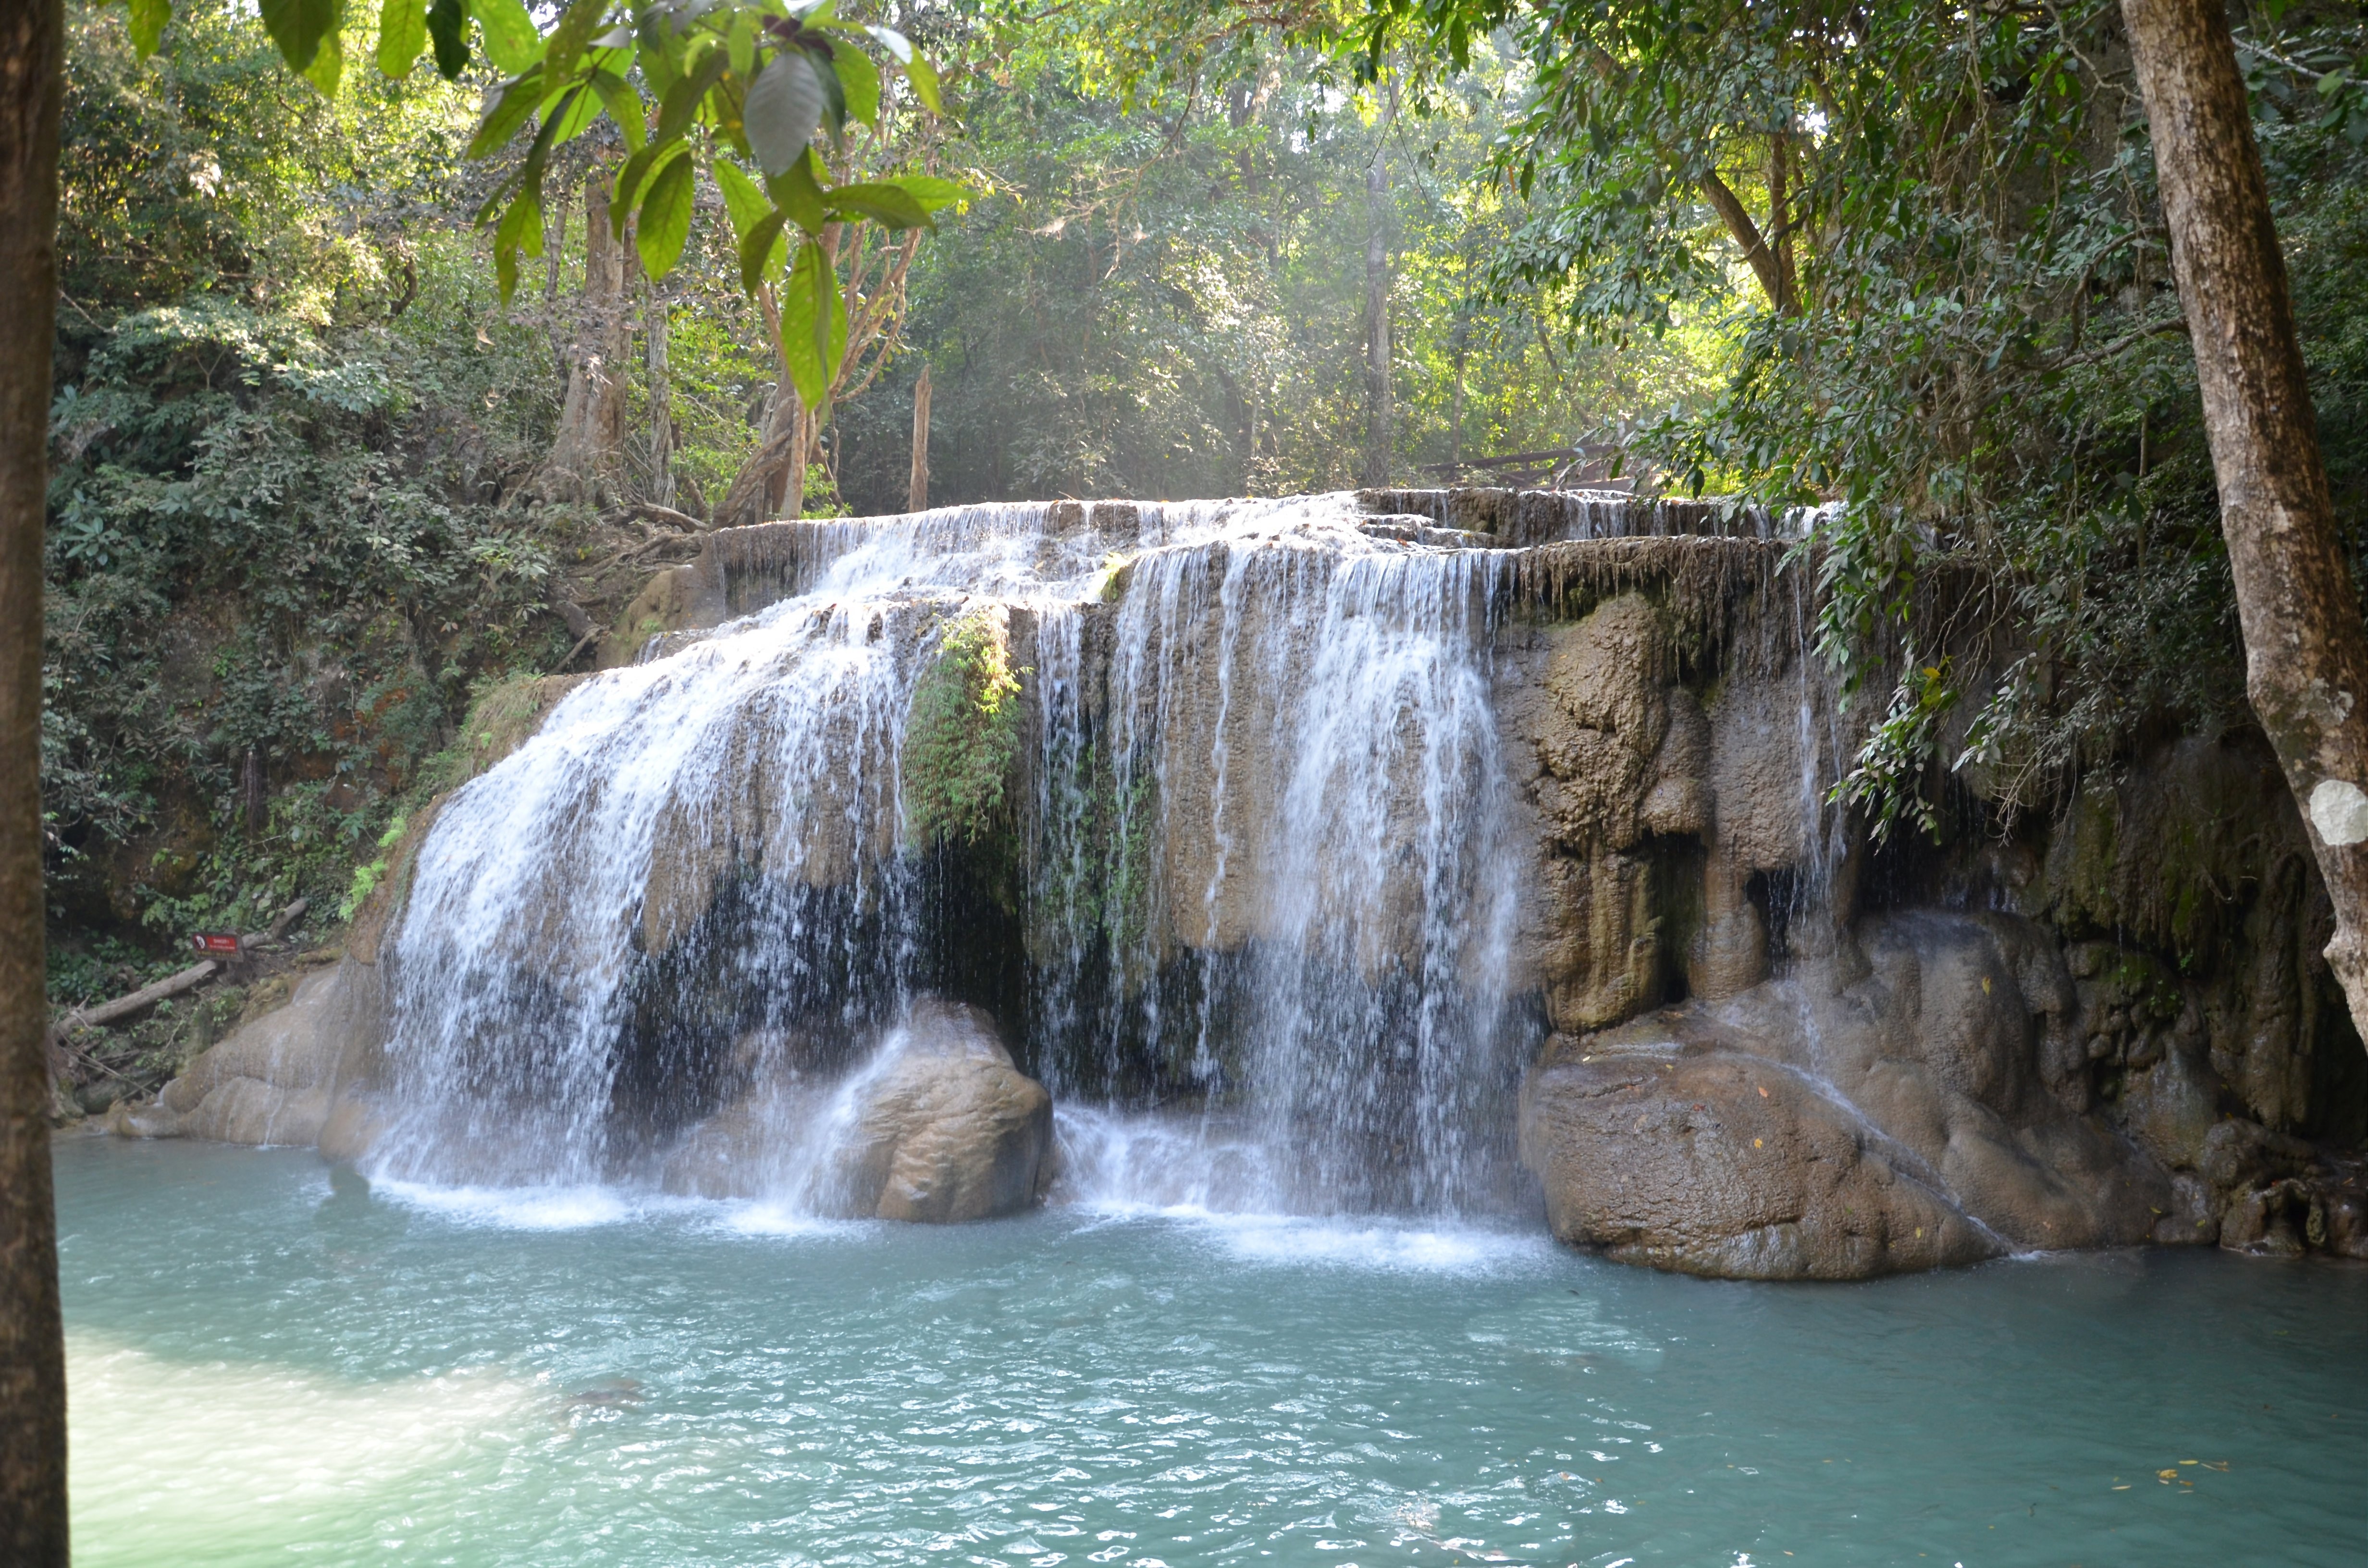 Thailand, Asia, South-East Asia, Tourism, waterfall, water